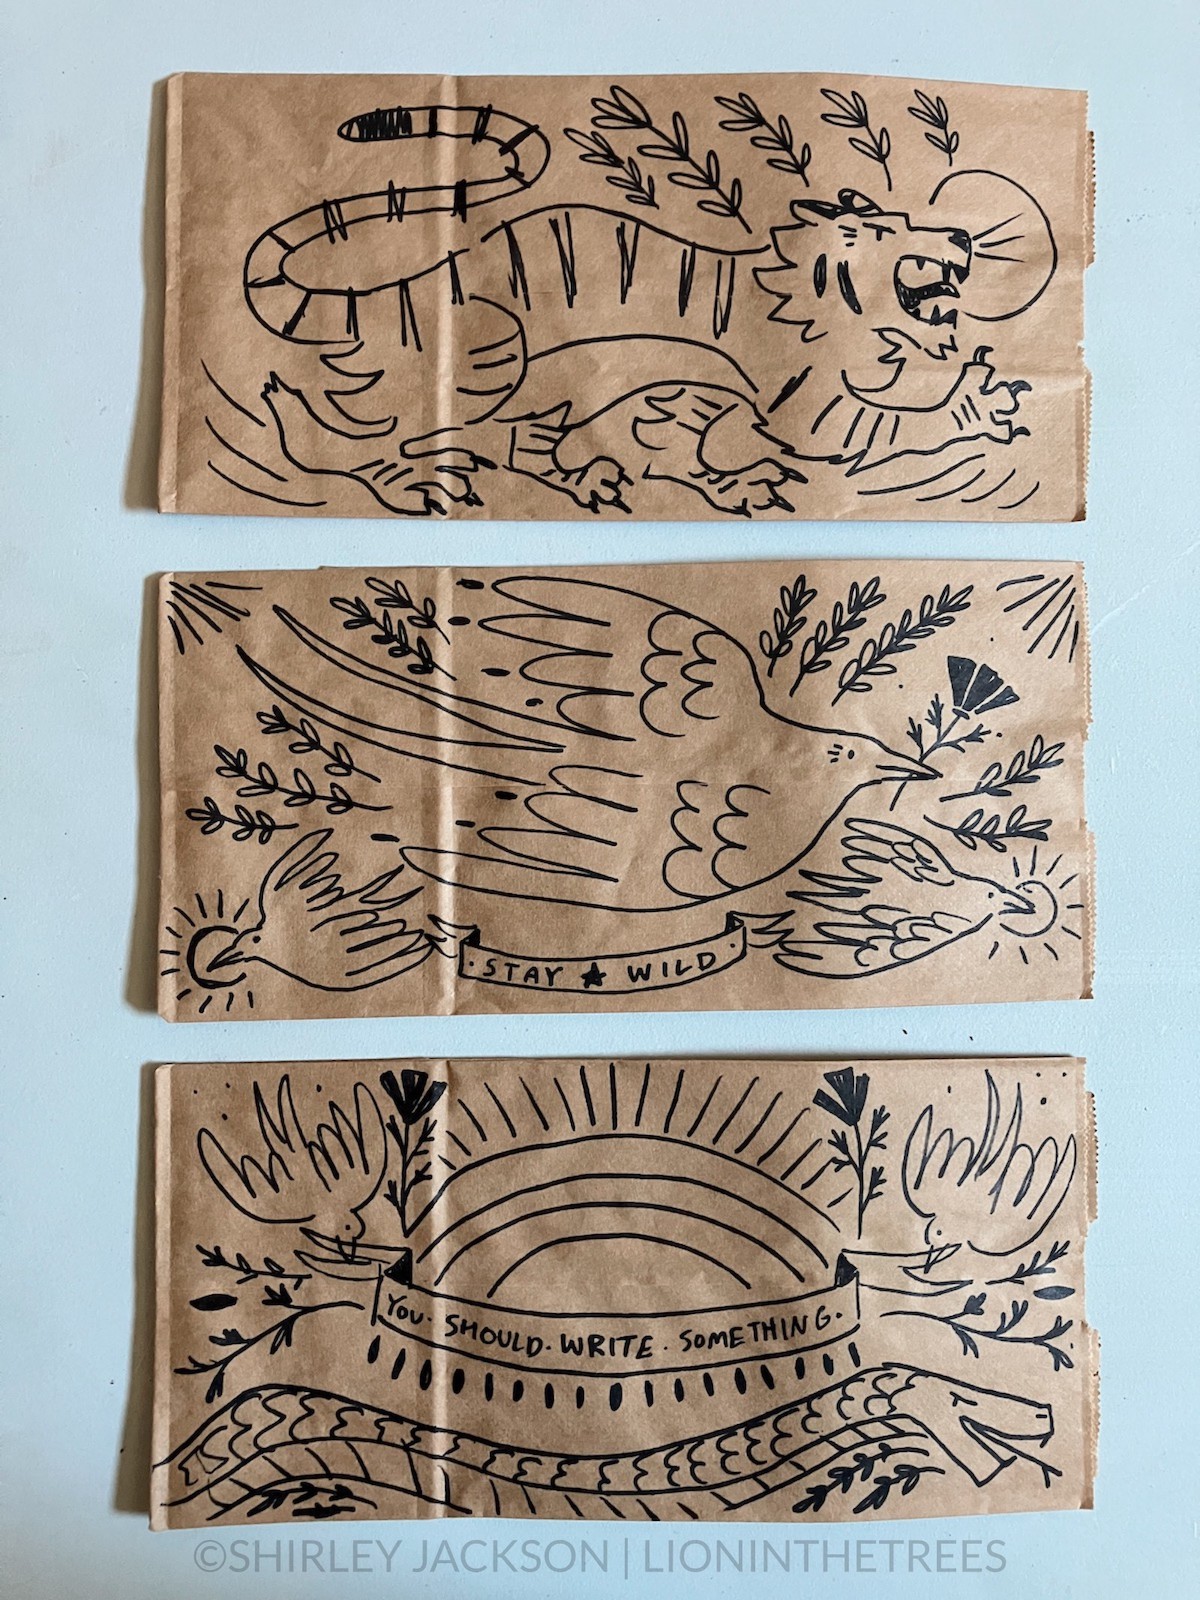 A photo of 3 brown paper lunch bags with a variety of doodles drawn with a sharpie on them. This variety features subject matter ranging from a tiger, a snake, and several barn swallows with lettering and plant-like motifs.